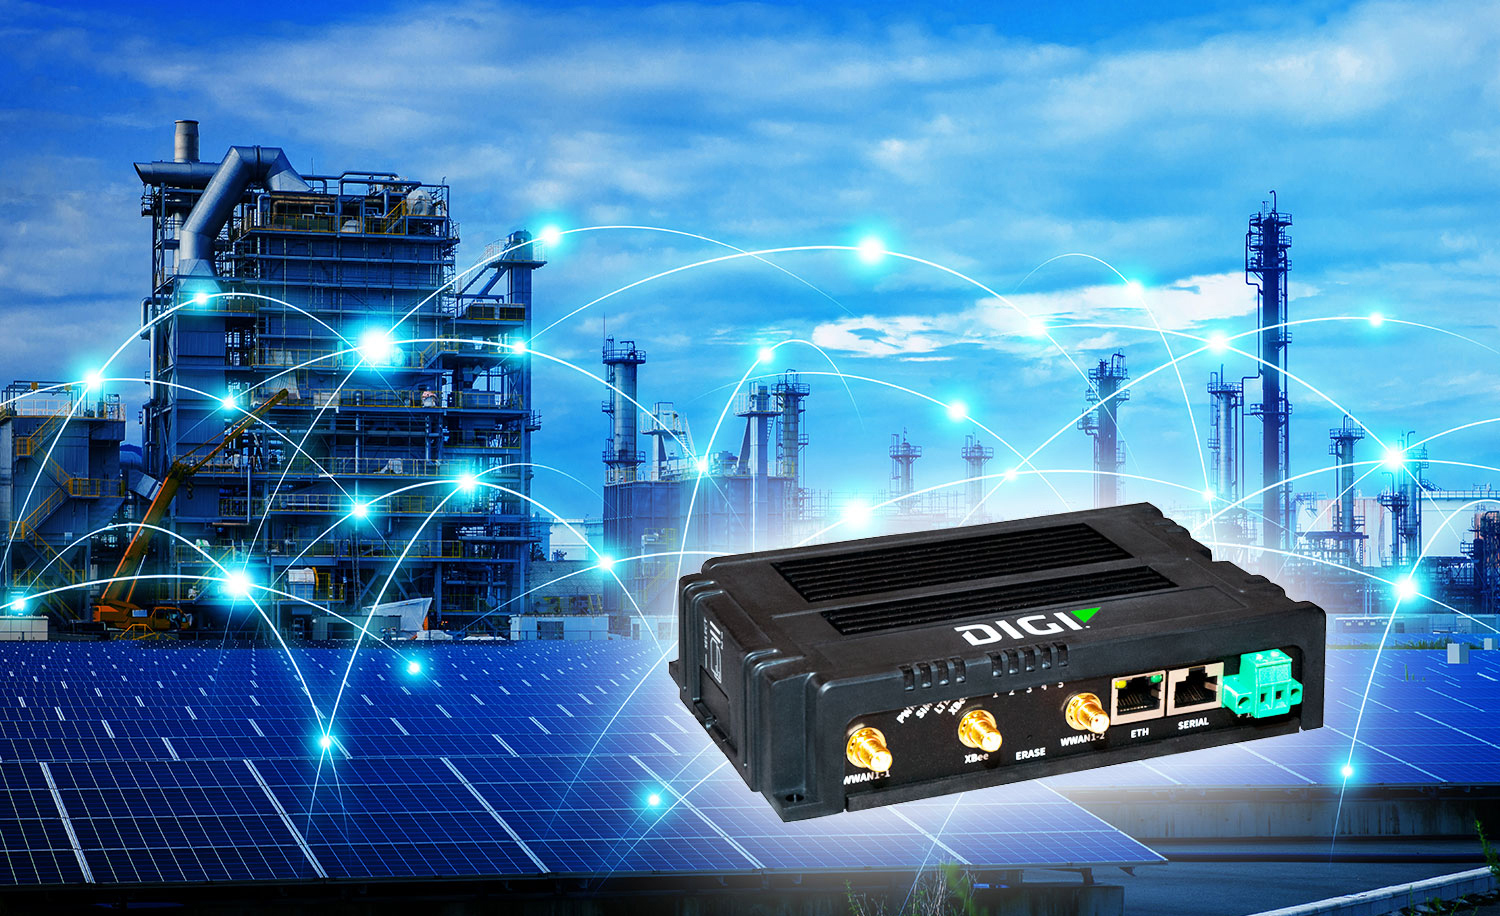 New industrial network solution Digi IX15 combines gateway and router